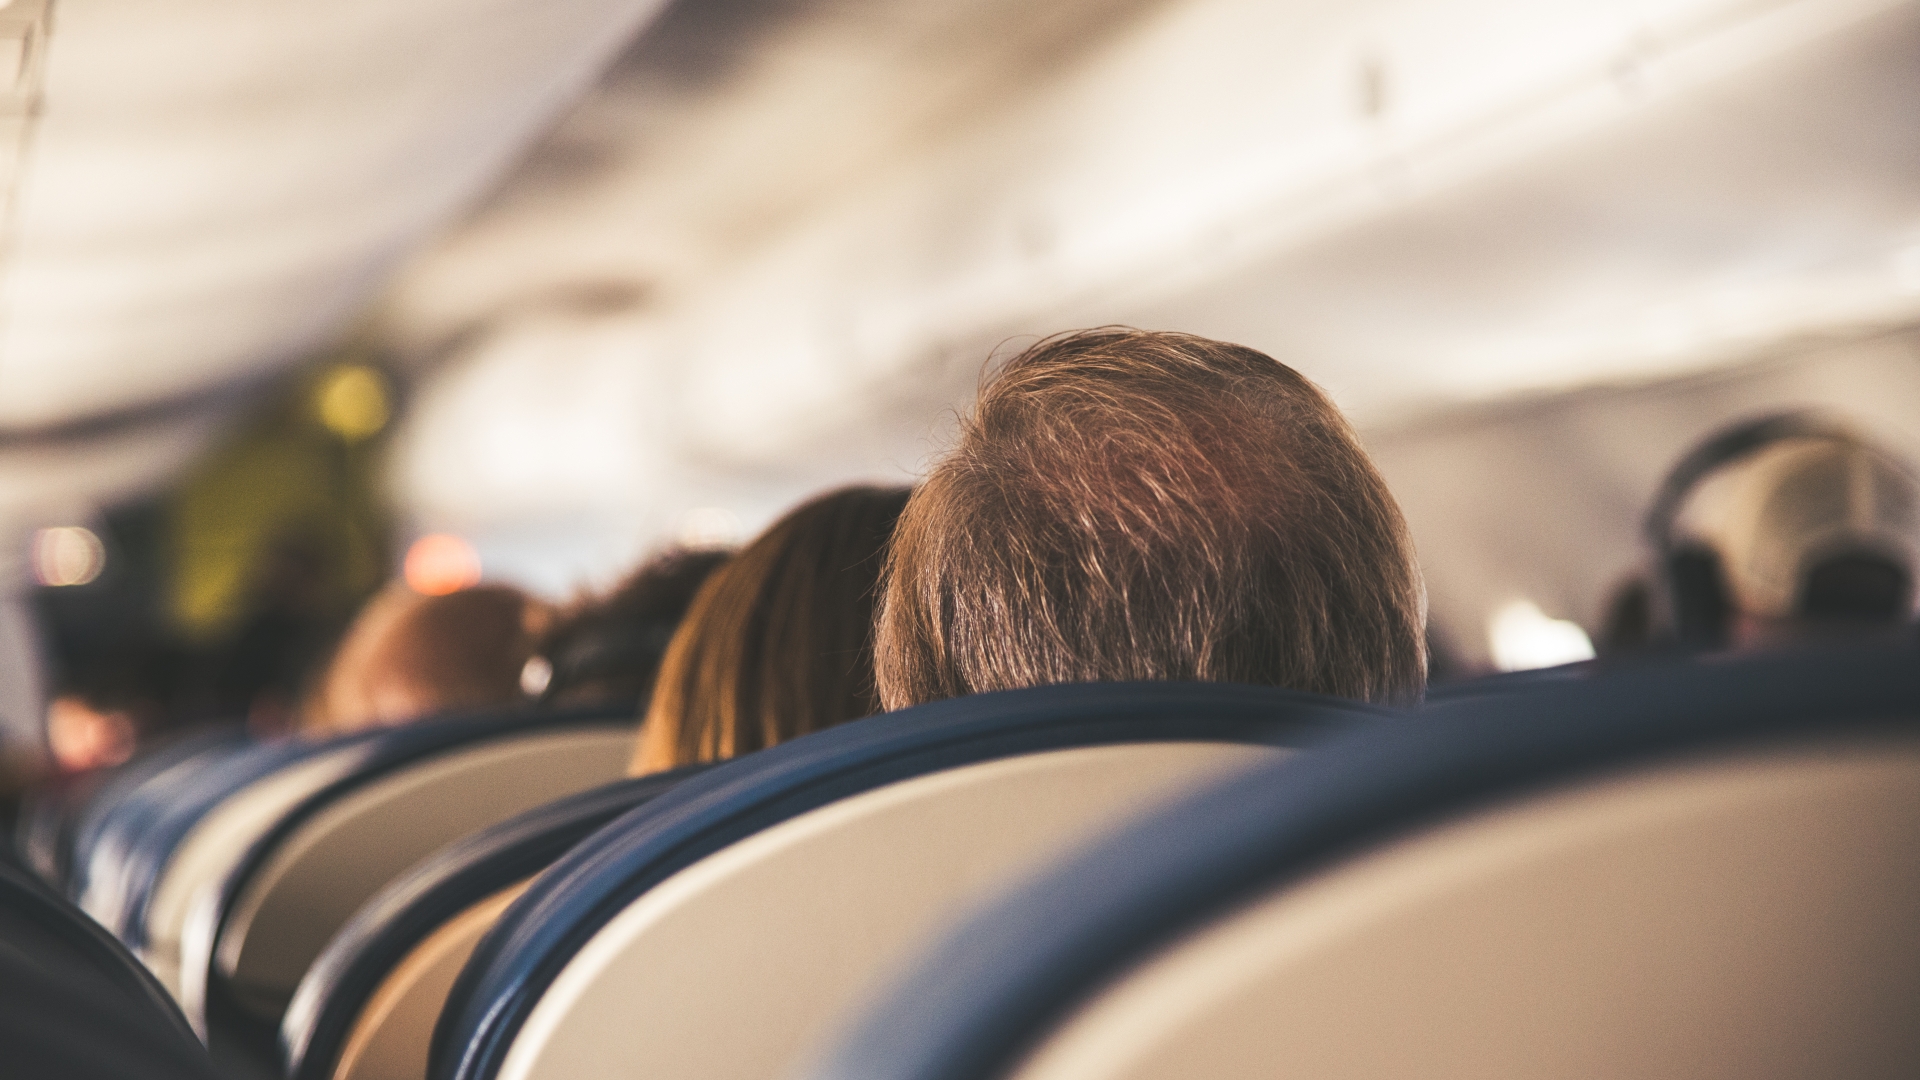 Here’s why I am a psychologist and passengers on planes are so irritating to me